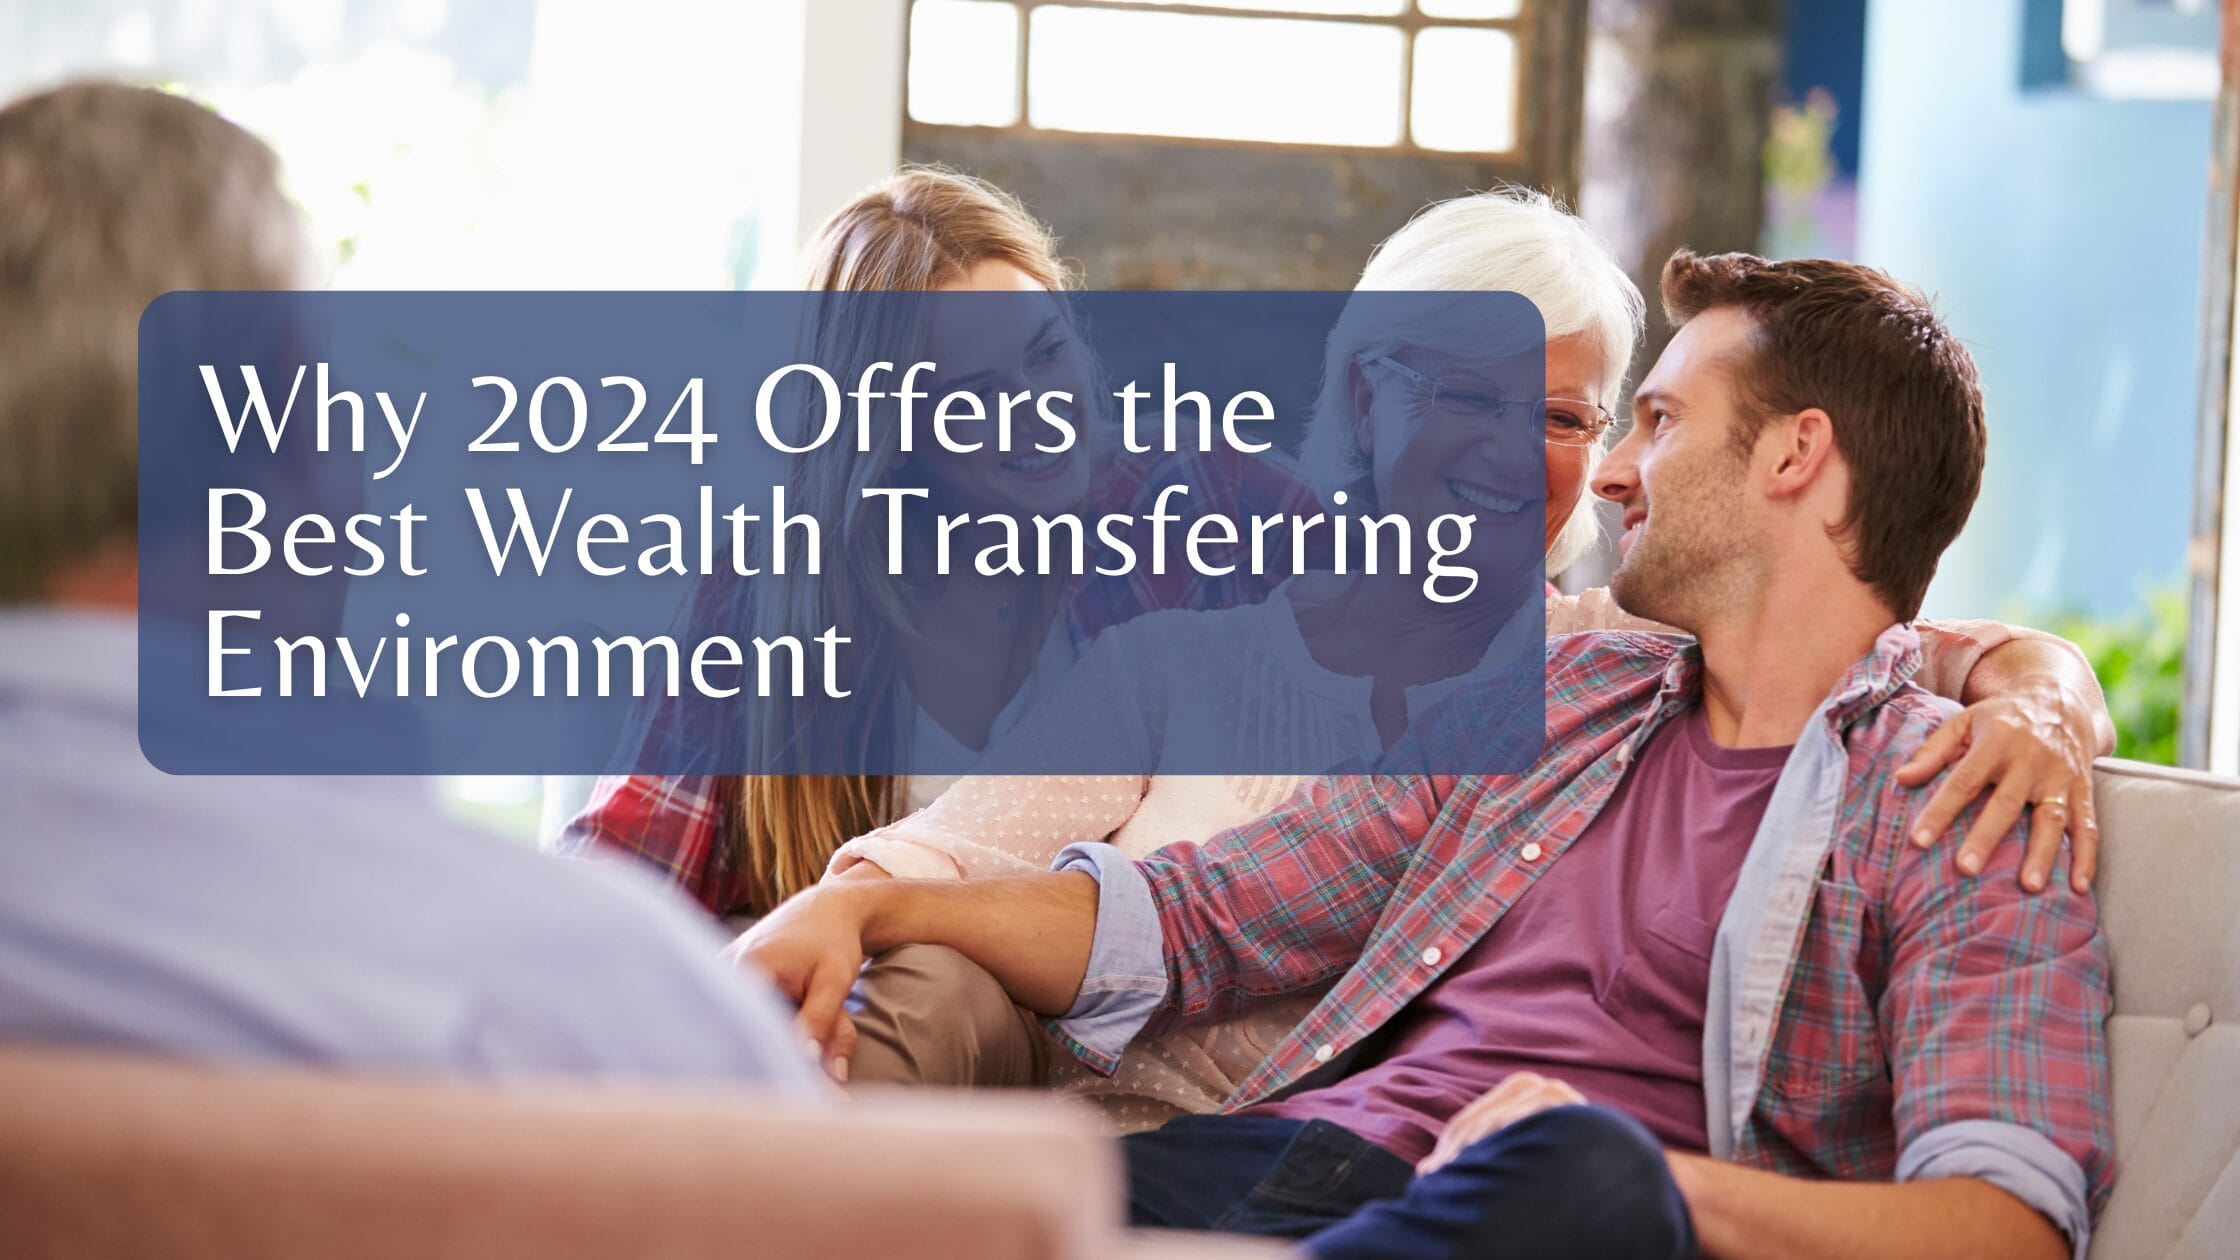 Why 2024 Offers the Best Wealth Transferring Environment